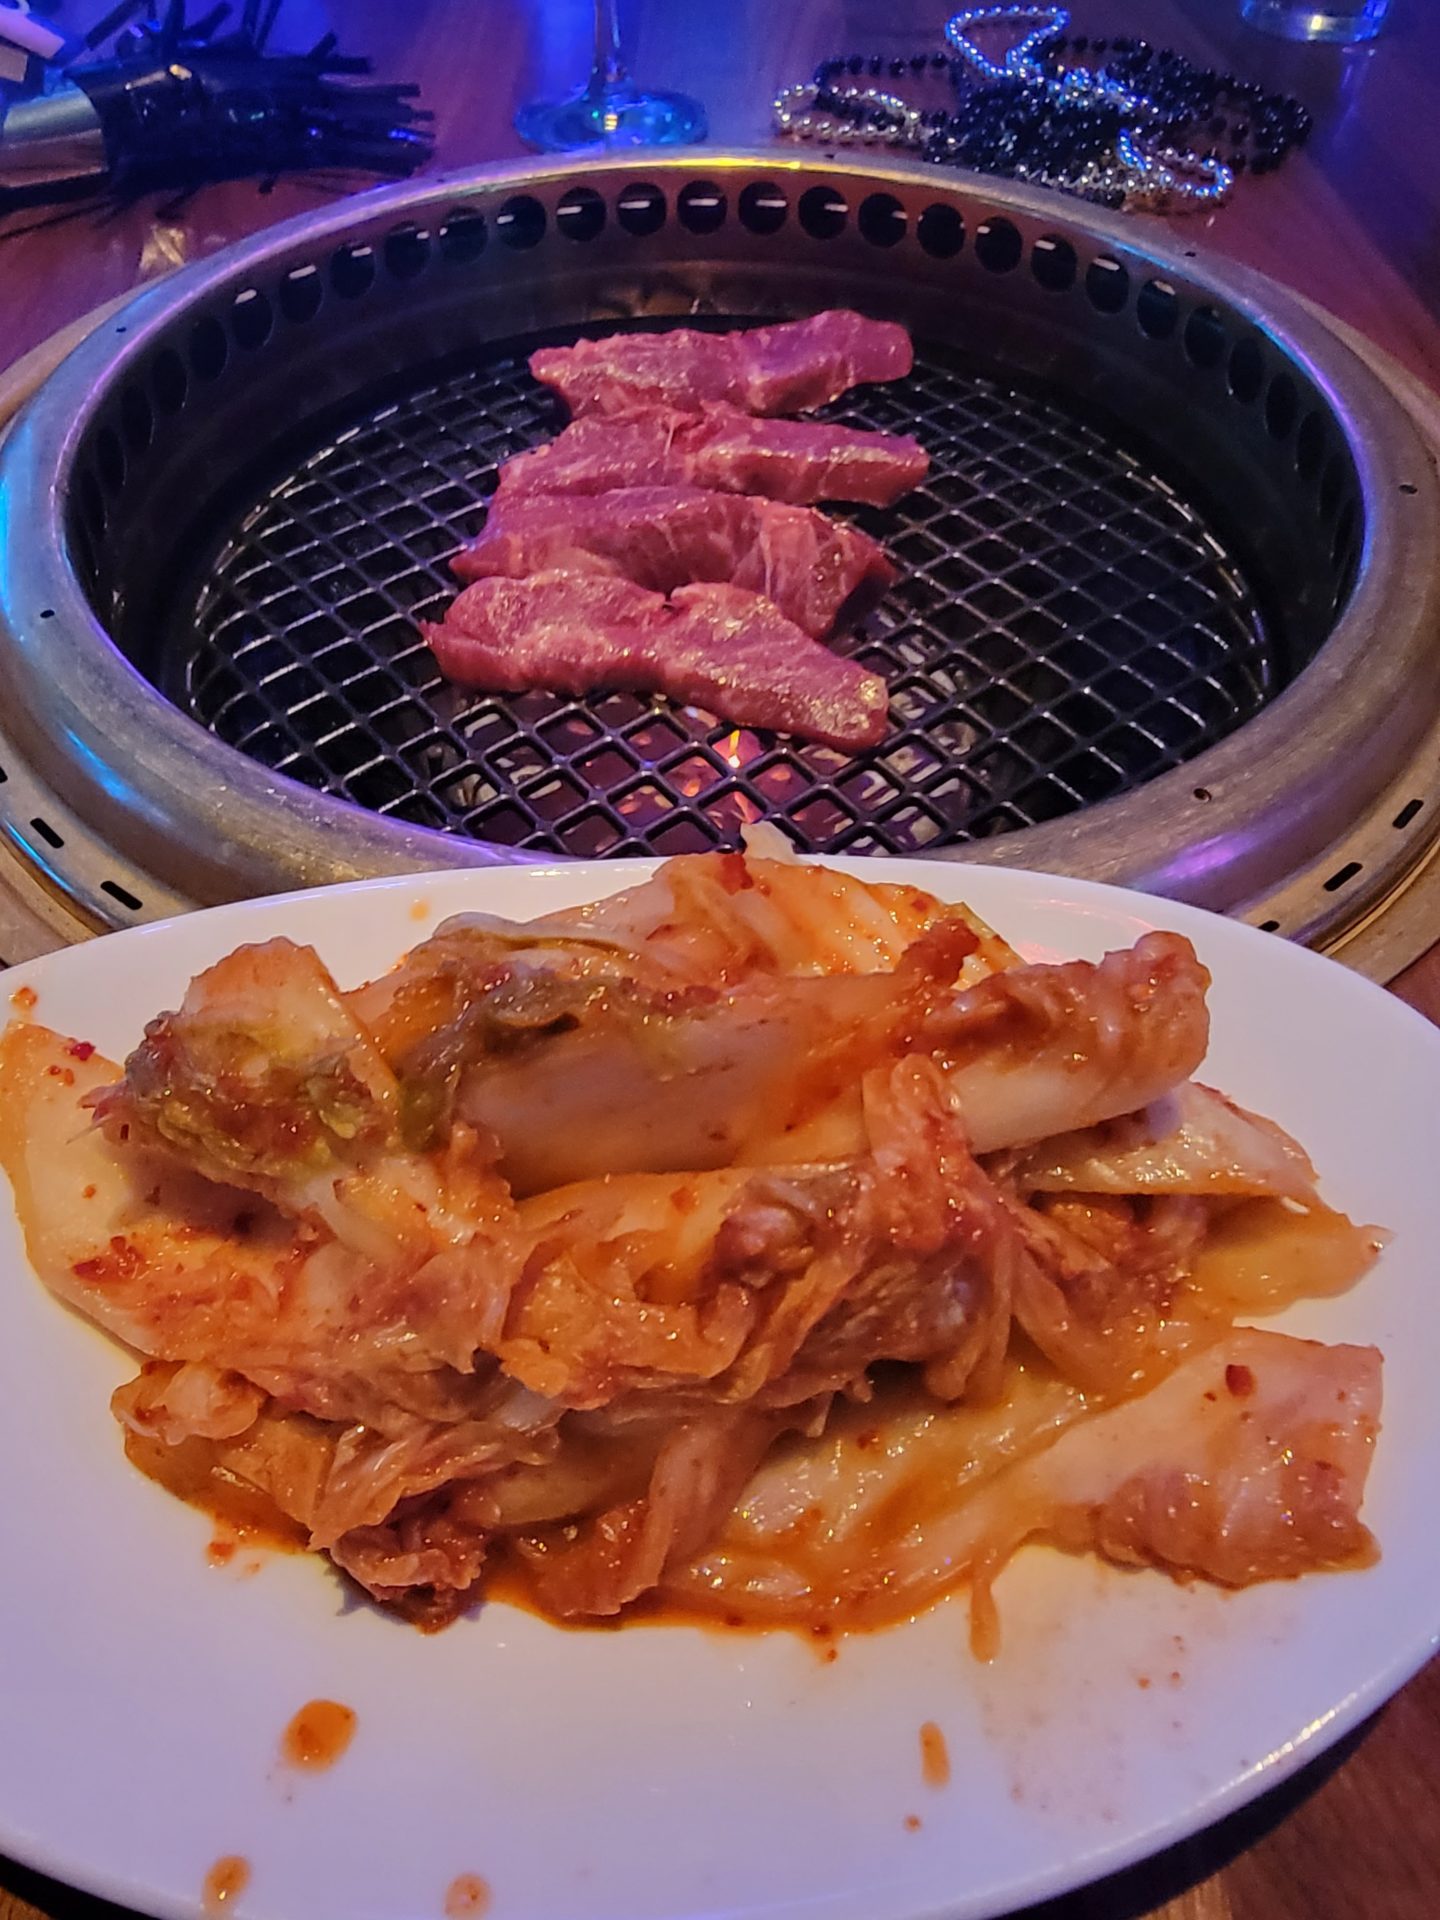 a plate of food on a grill